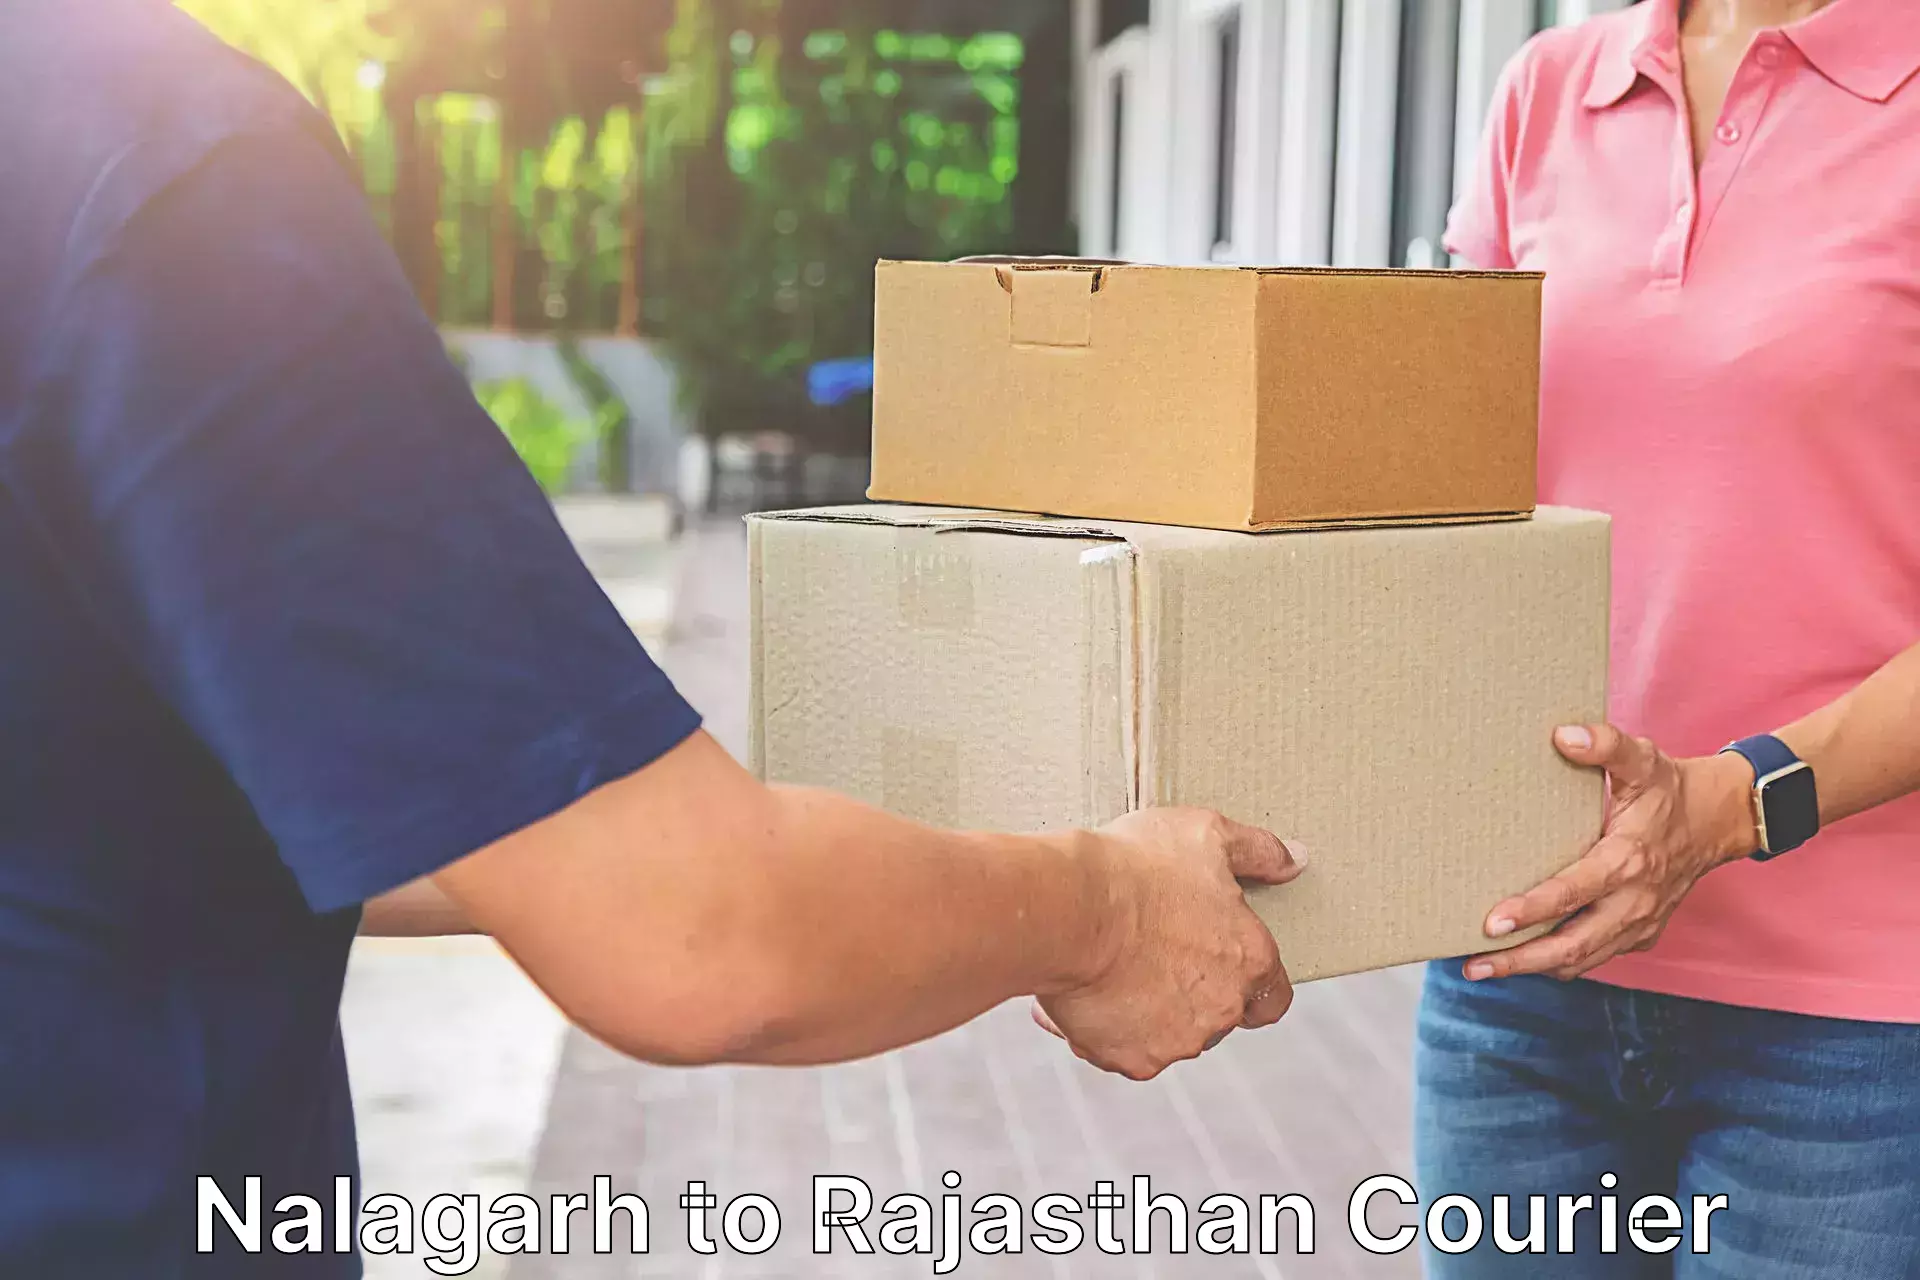 Reliable package handling in Nalagarh to Shrimadhopur